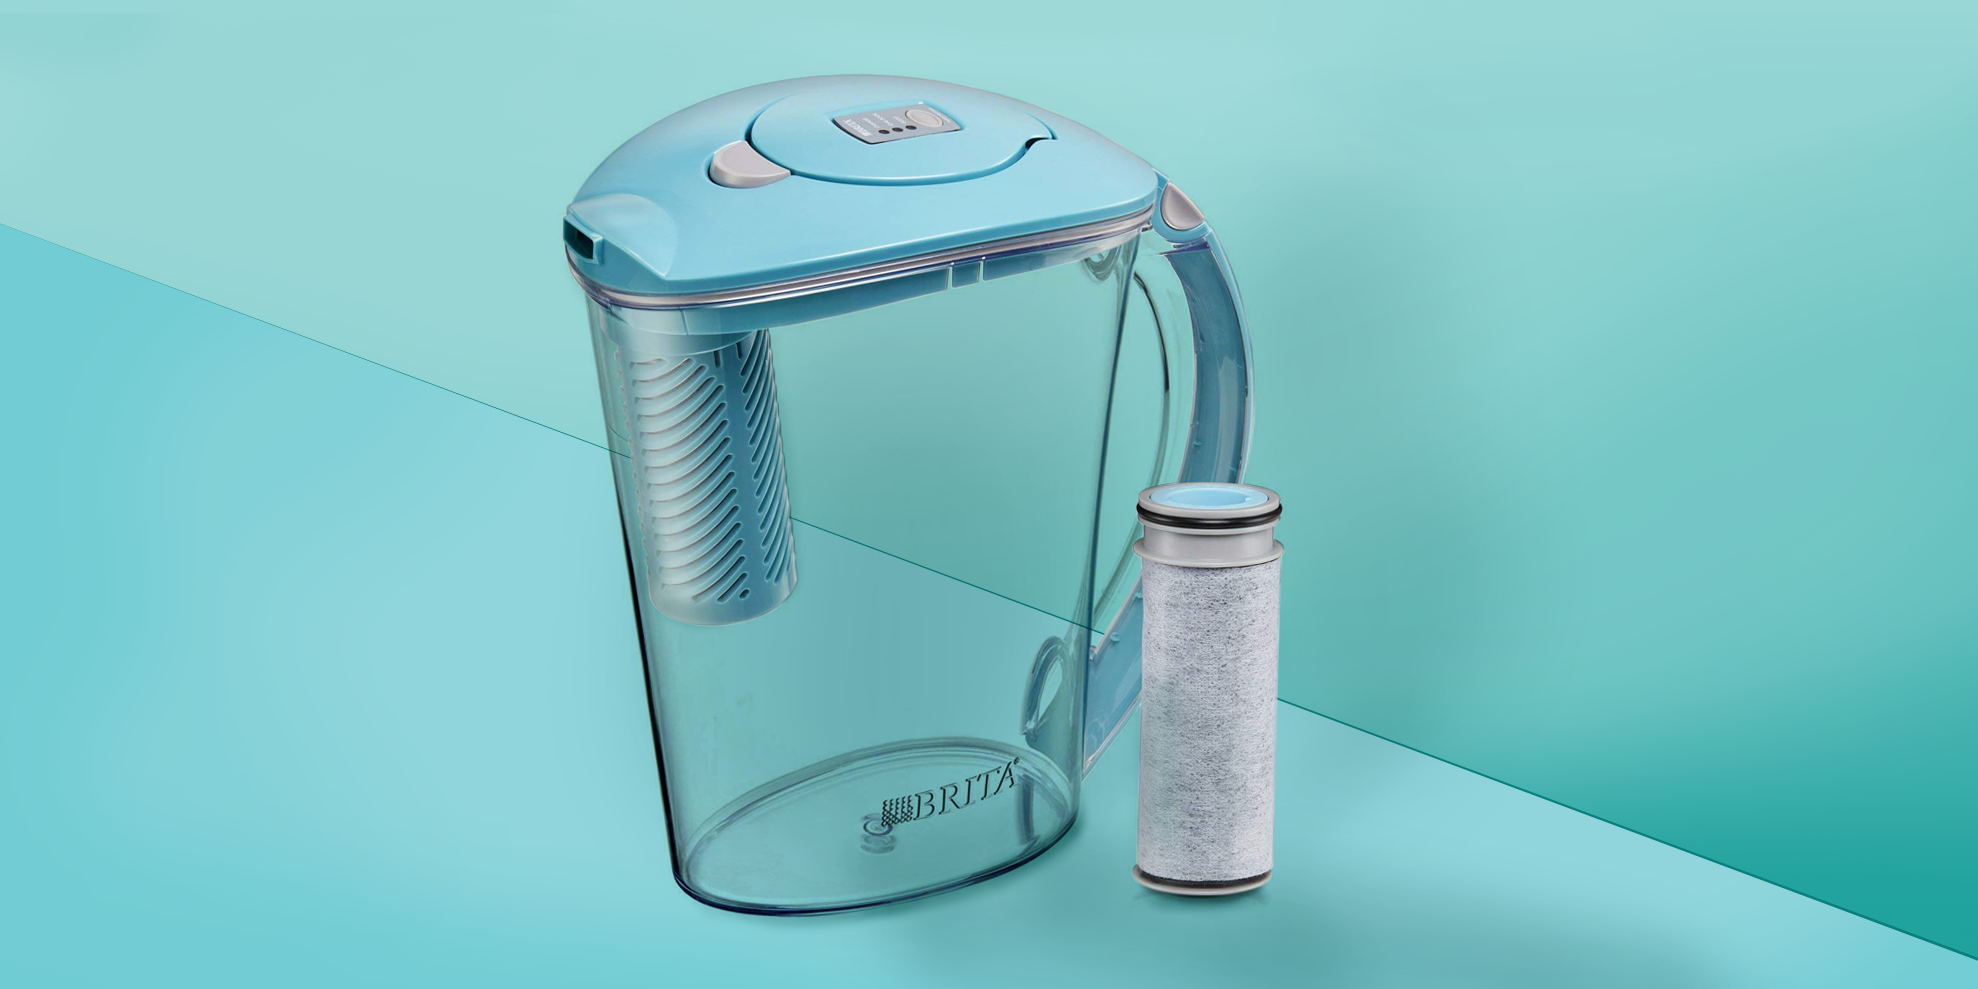 water purifier in usa